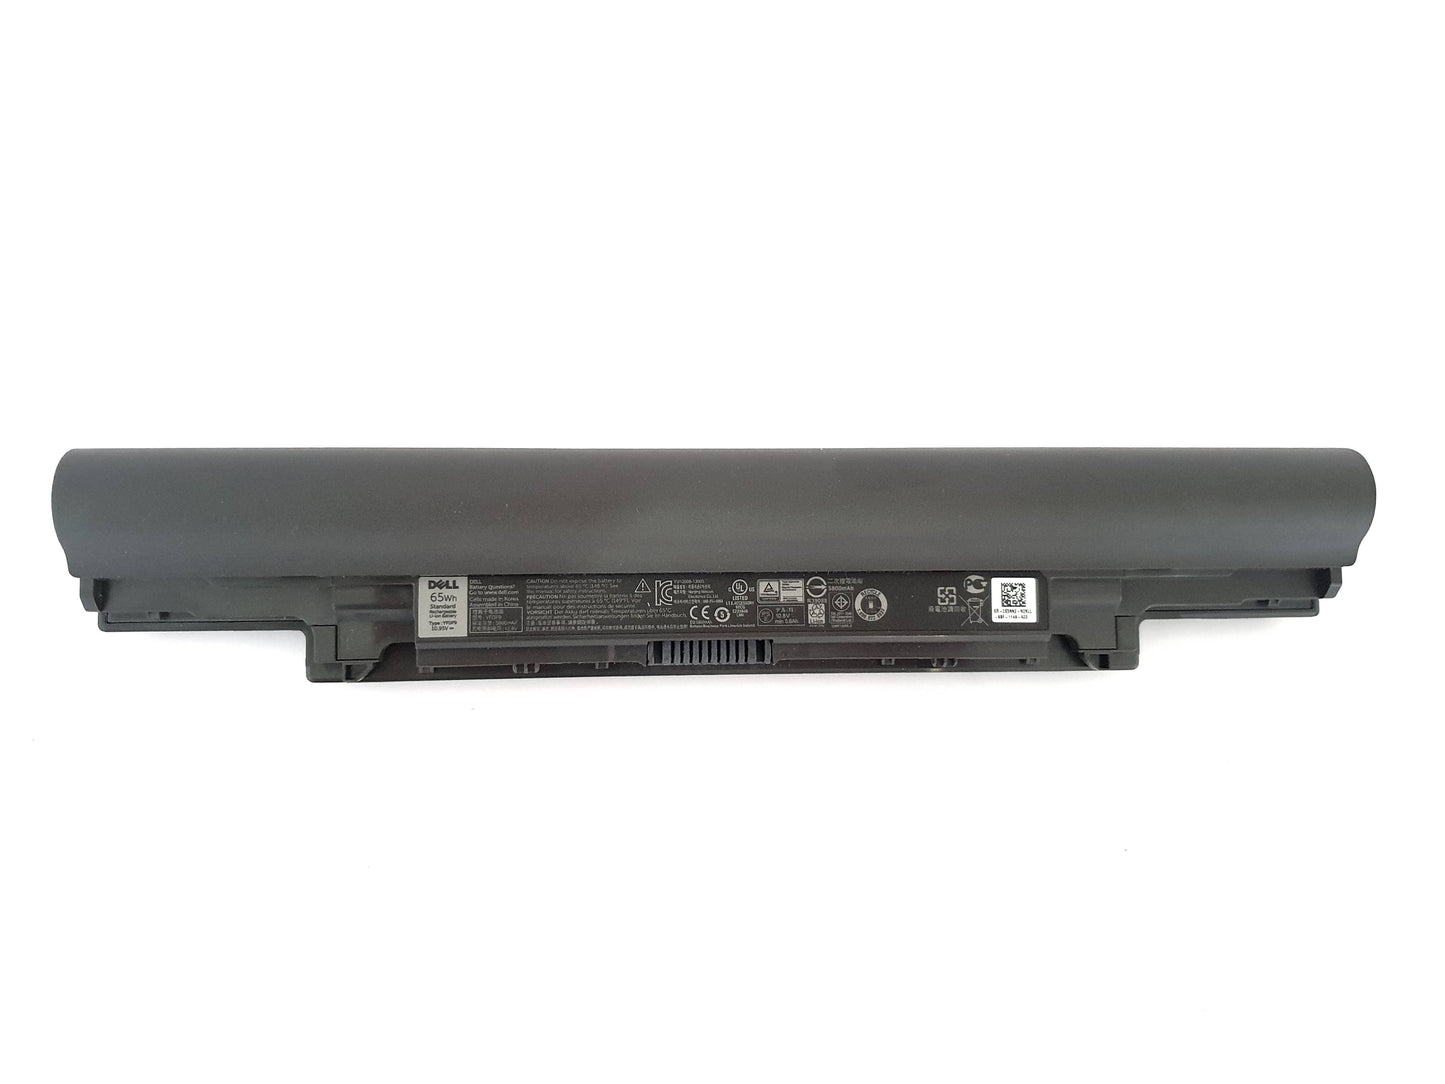 Dell Latitude 3340 3350 Laptop Battery 6-Cell 65Wh YFDF9 | Black Cat PC